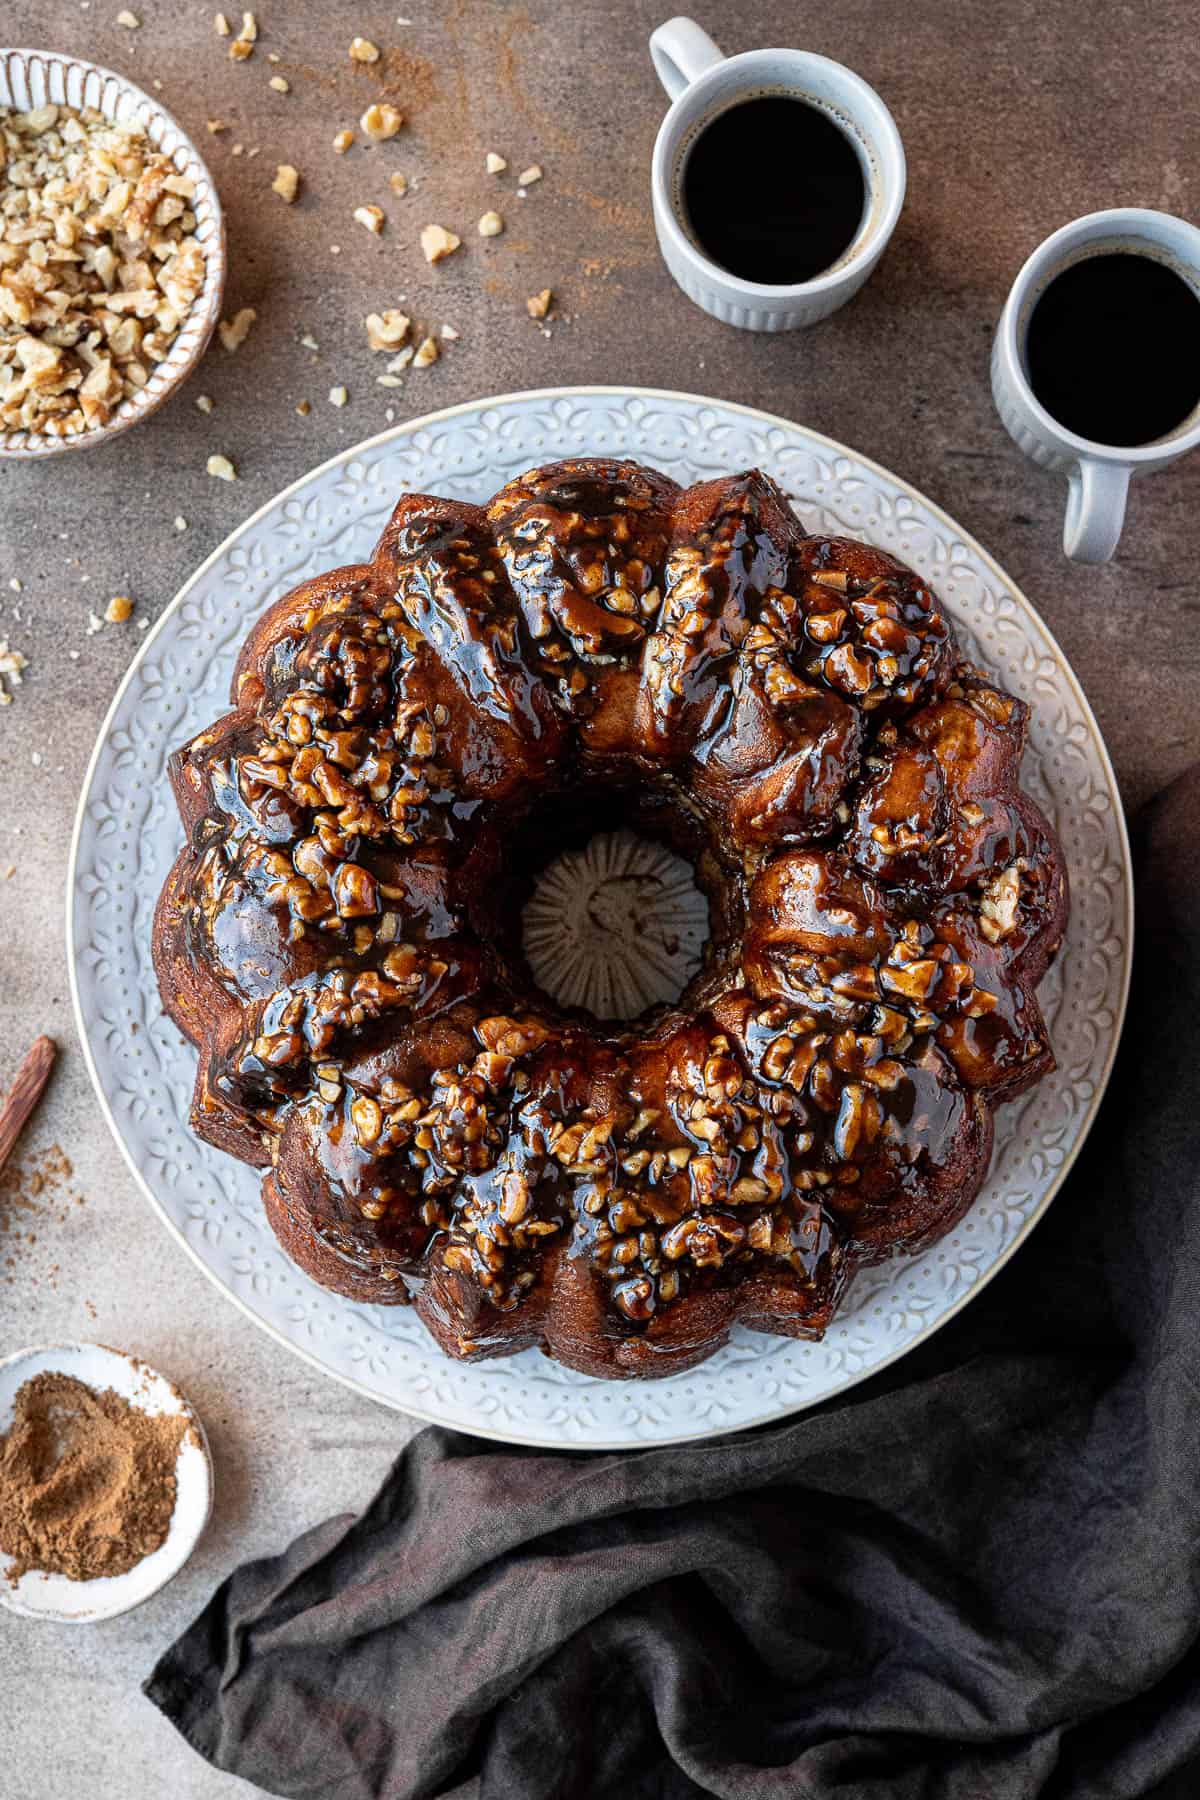 Vegan banana monkey bread  on a white plate with cups of coffee and bowls of walnuts and cinnamon.